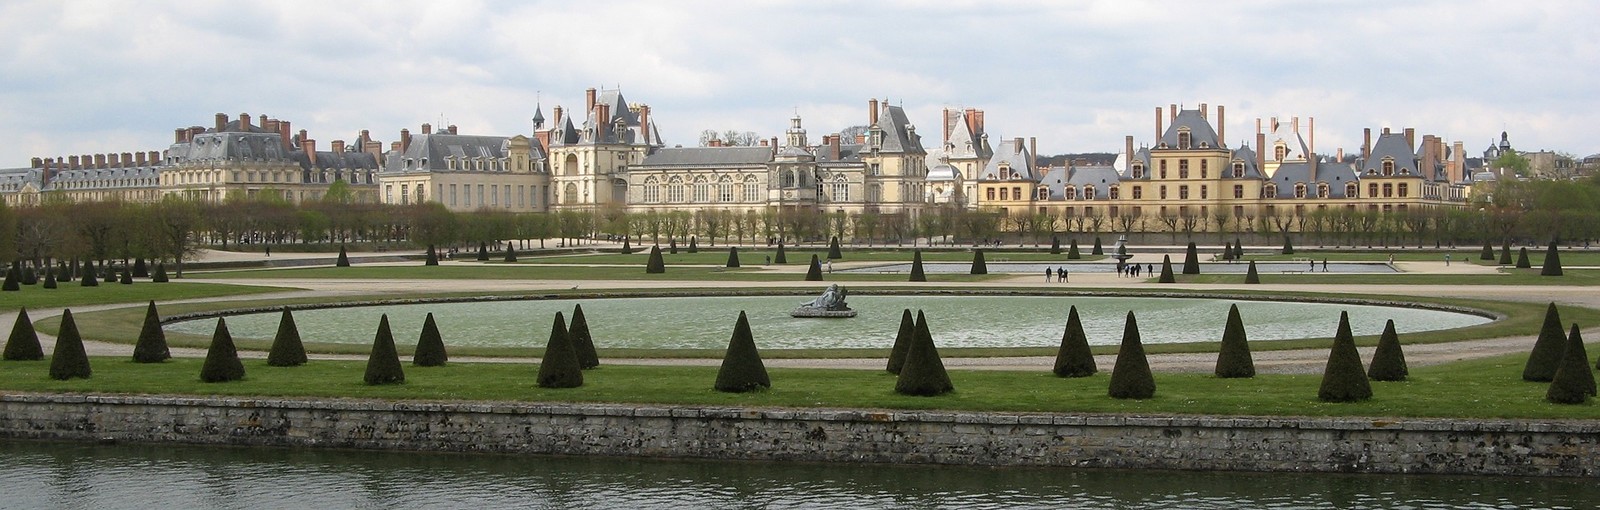 Tours Fontainebleau and Vaux-le-Vicomte - Full days - Day tours from Paris